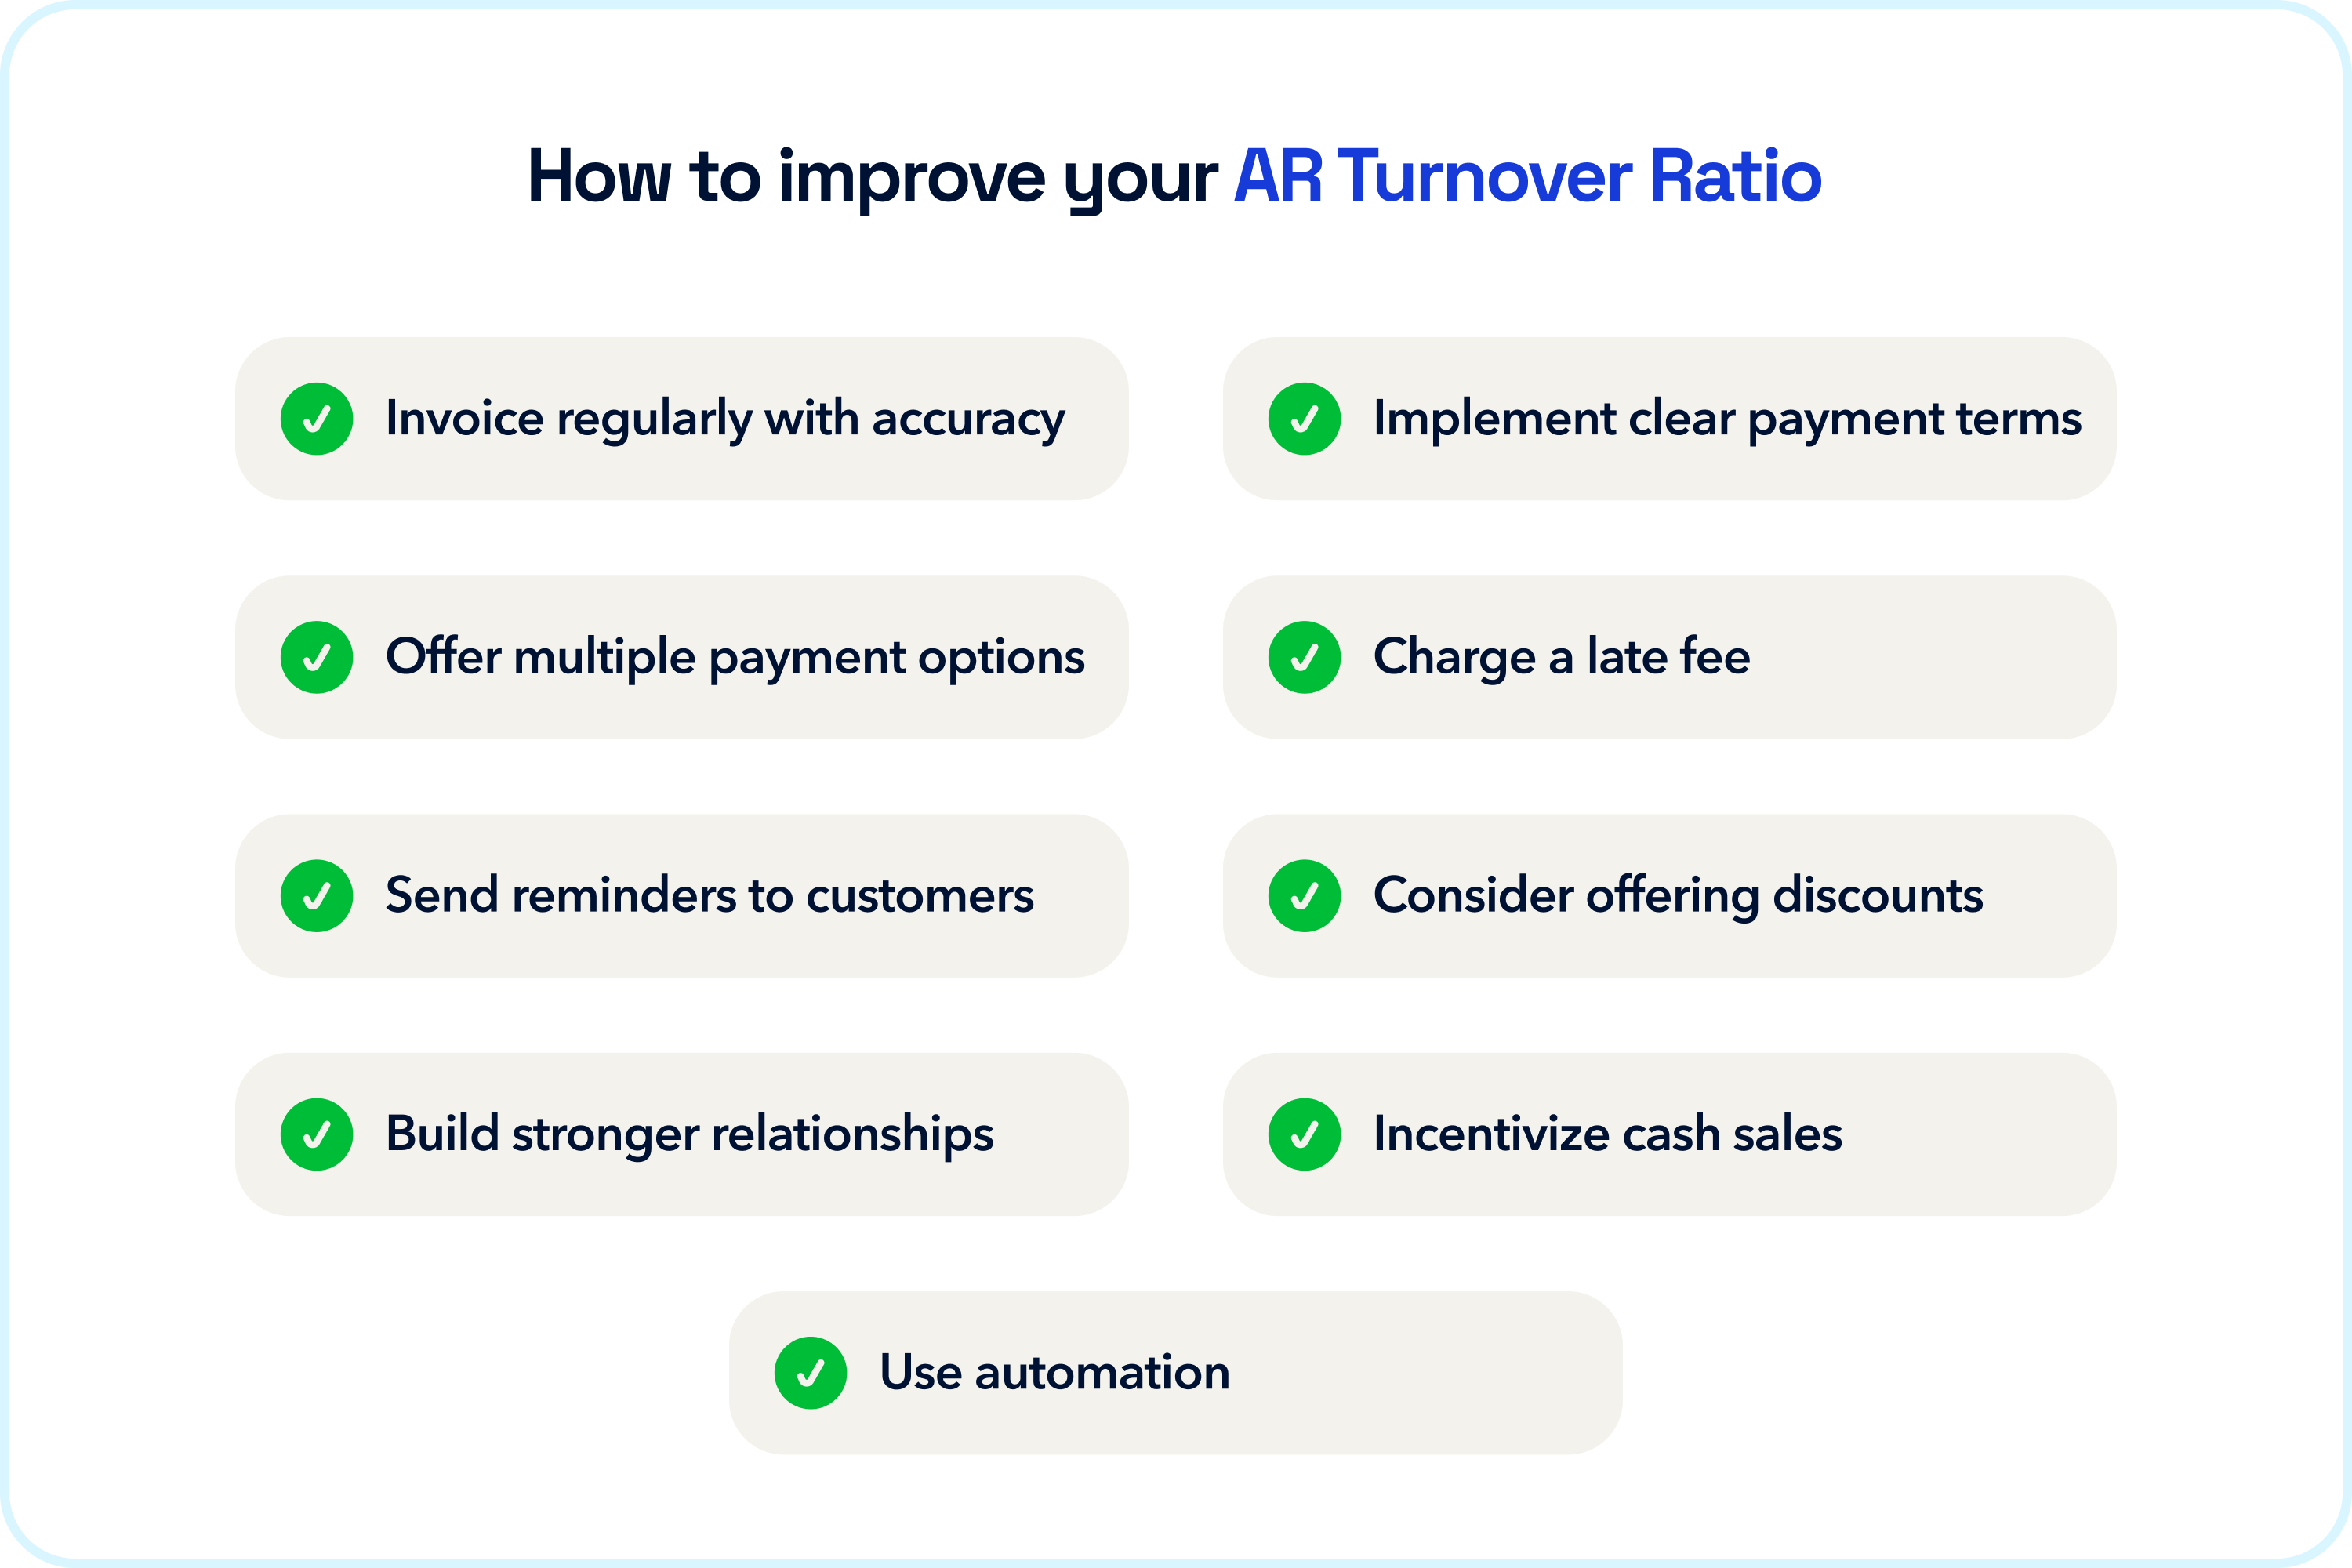 How to improve your AR Turnover Ratio